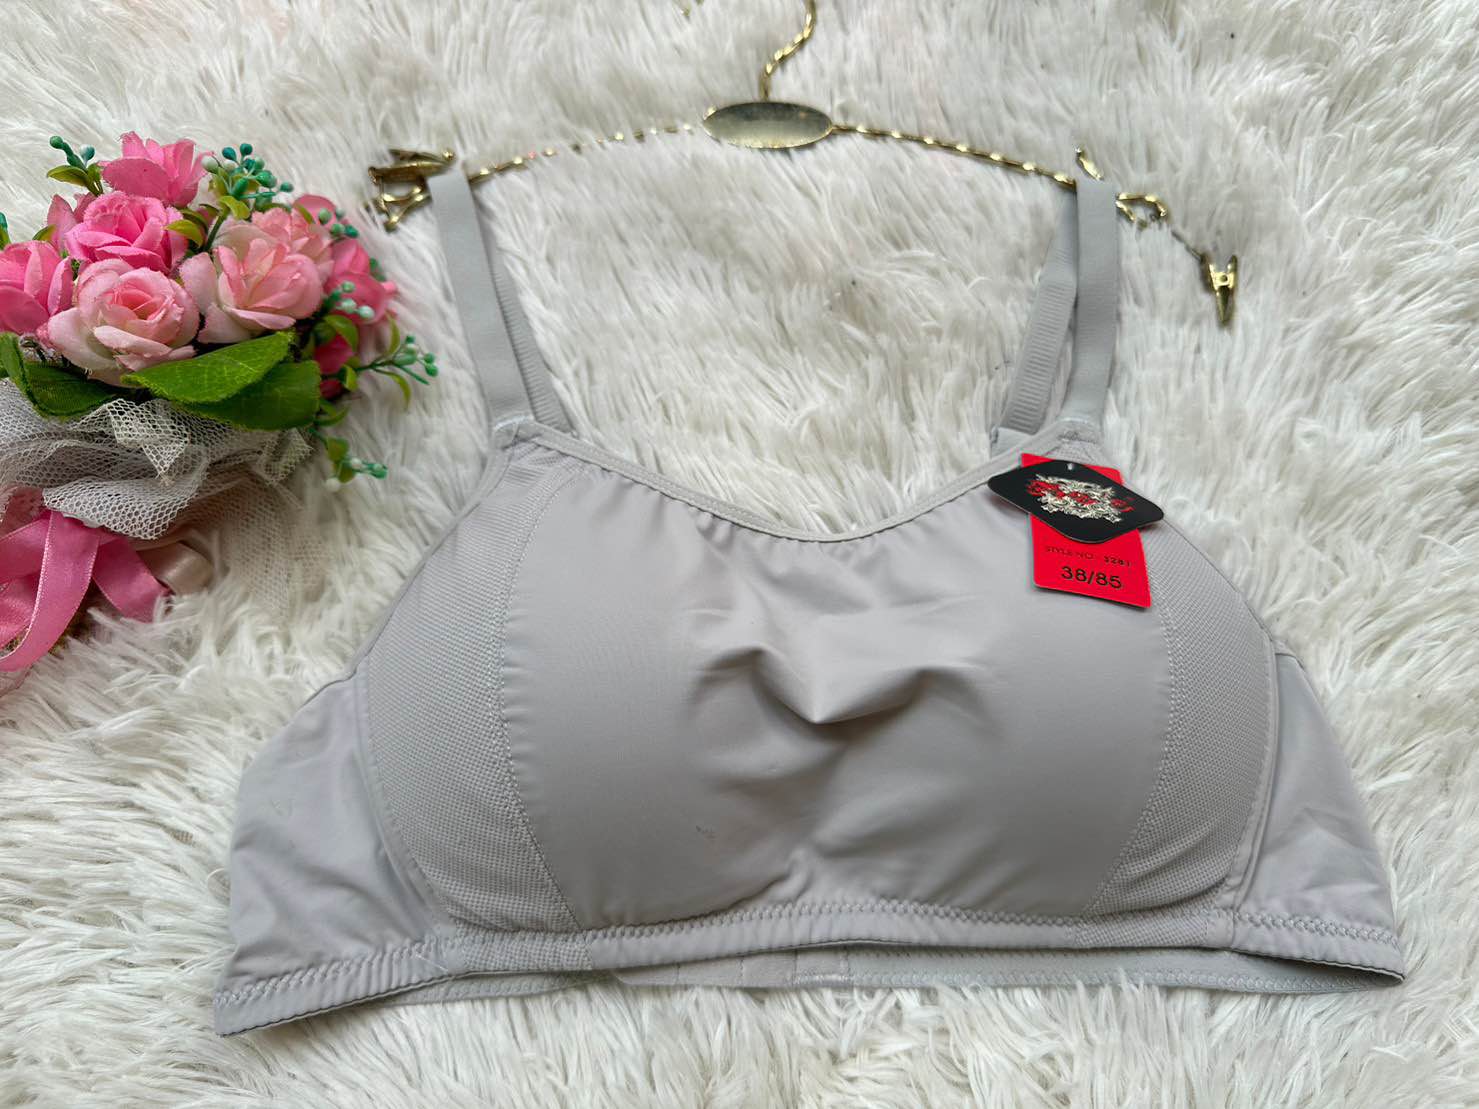 Bra Women's Breasts Are Gathered And Closed To Prevent Sagging